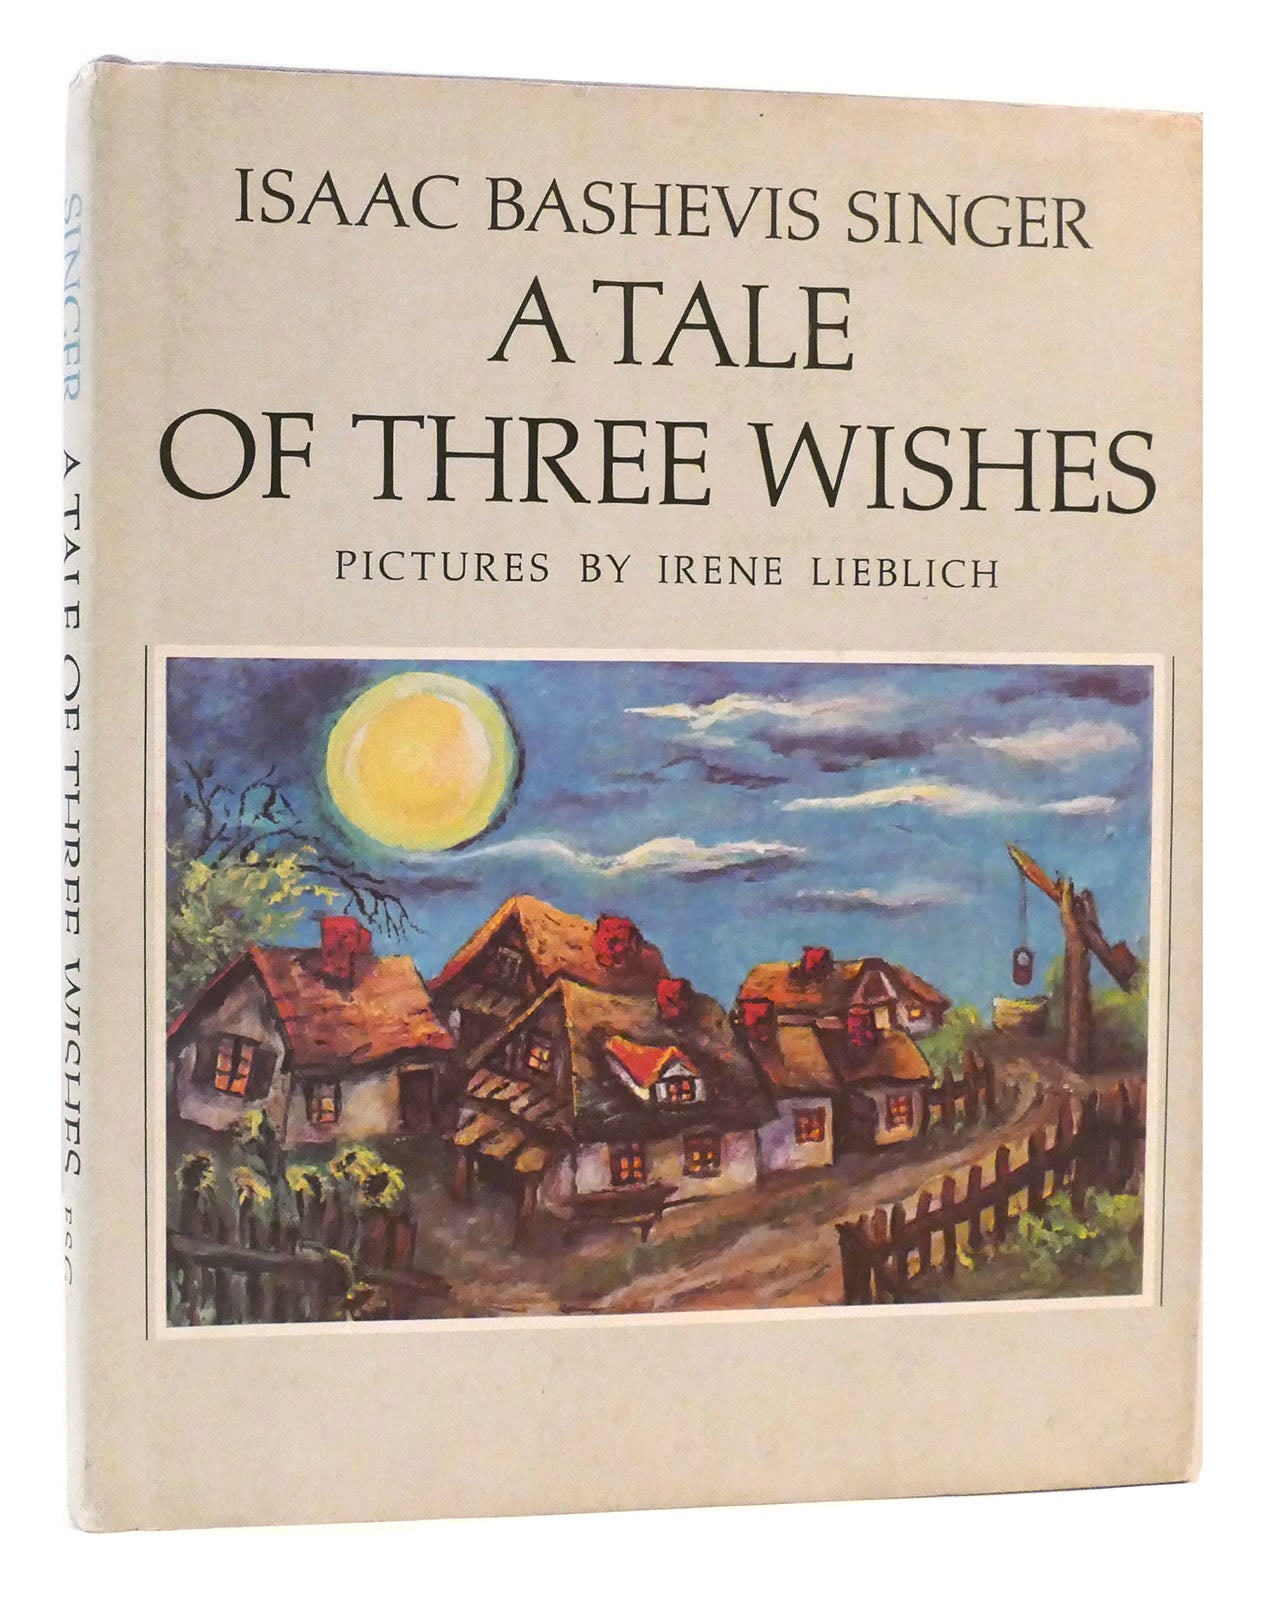 First　THREE　A　TALE　OF　Singer,　Lieblich　Irene　WISHES　Isaac　Bashevis　Edition;　First　Printing